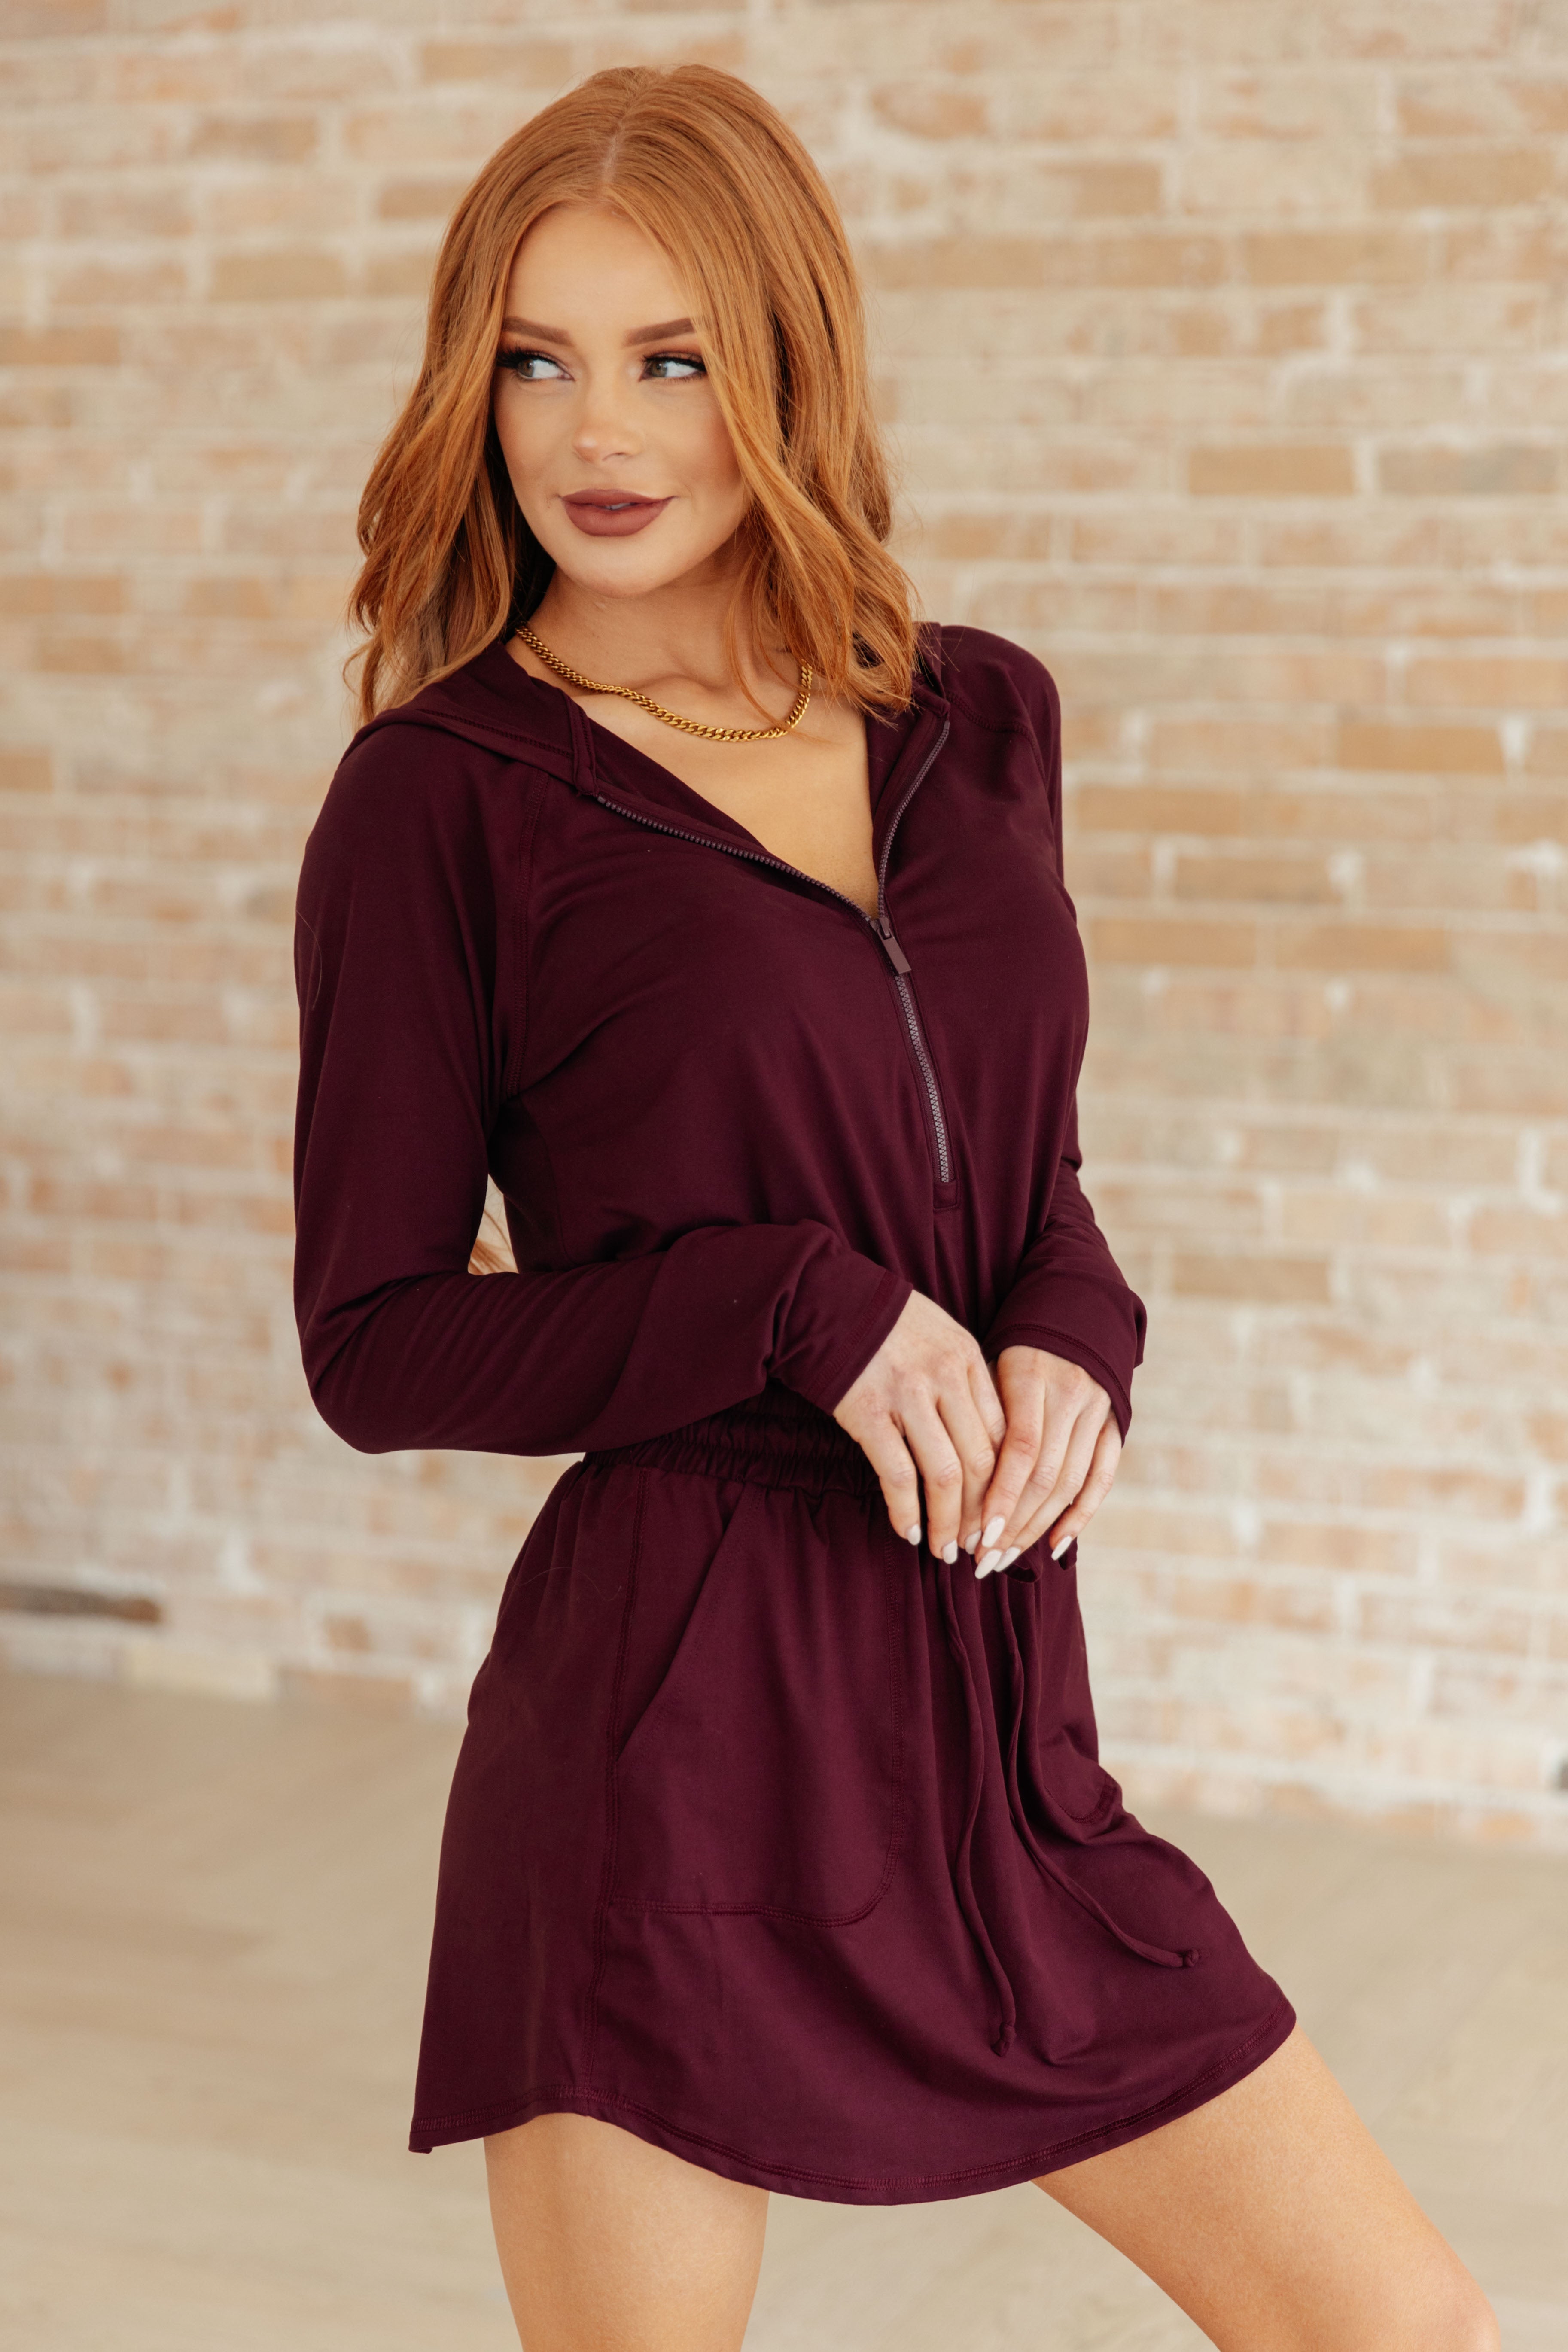 Getting Out Long Sleeve Hoodie Romper in Maroon Athleisure Ave Shops   